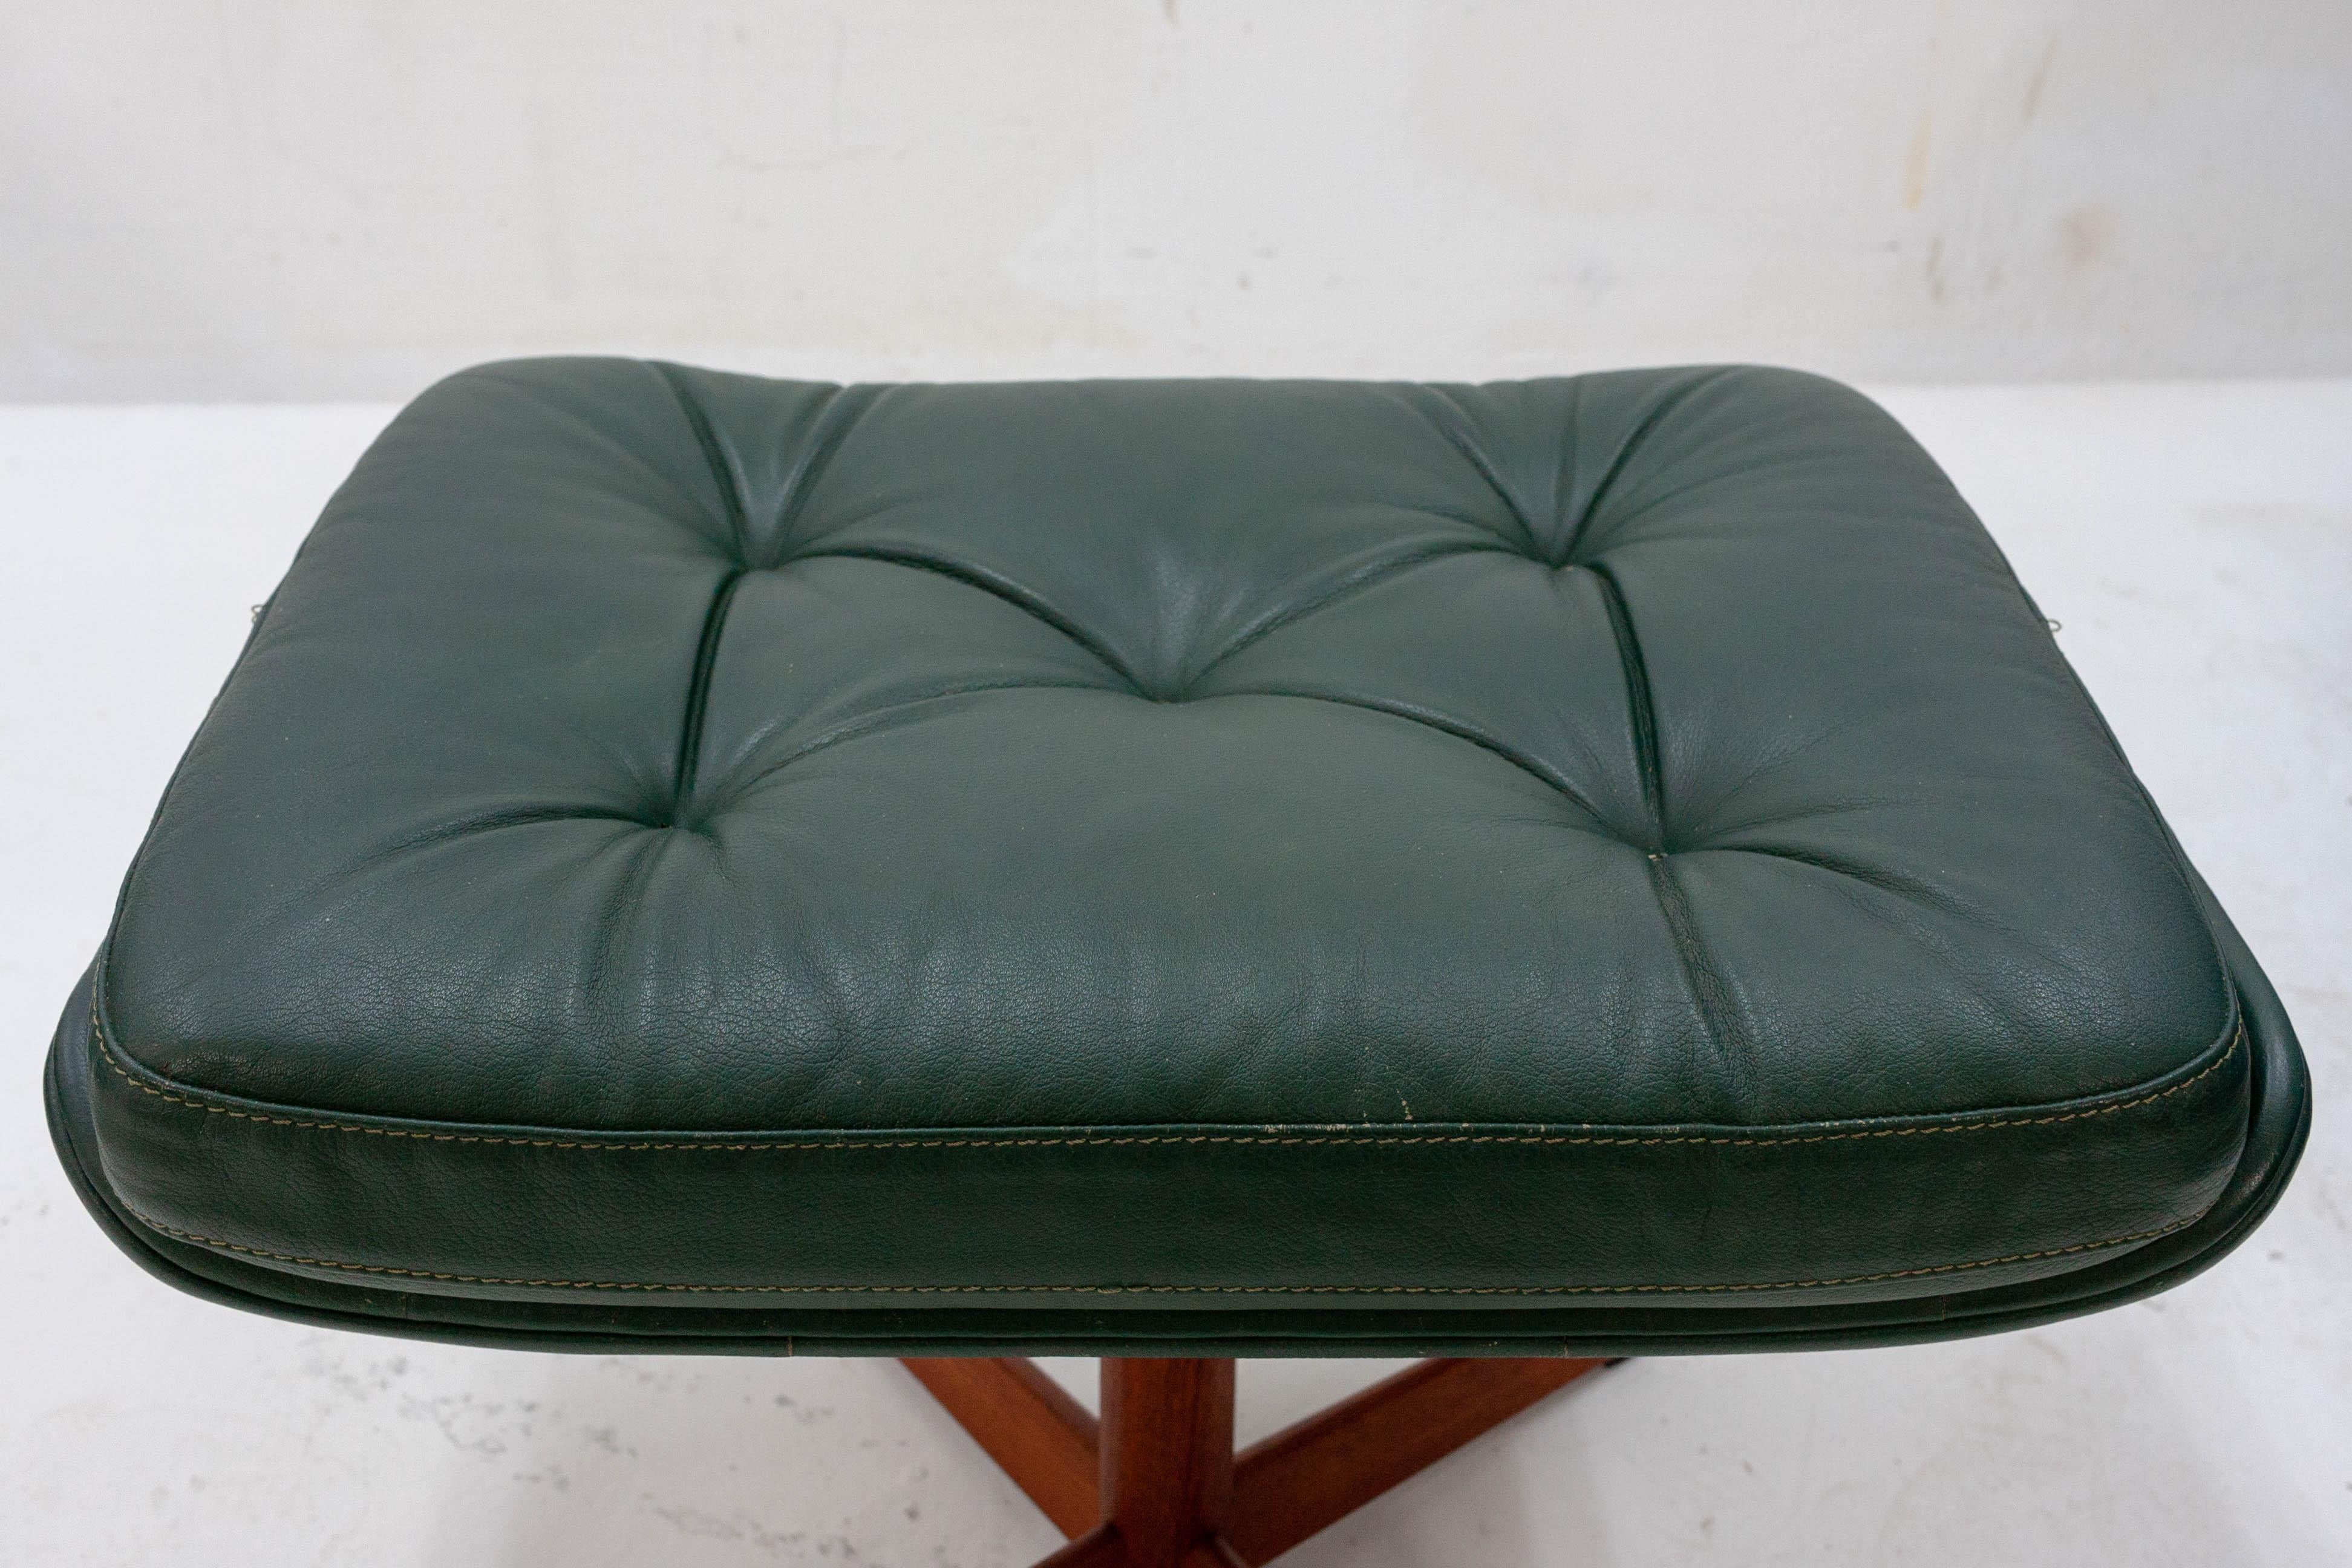 Beautiful green leather armchair and ottoman. The chair features a step less tilt control allowing the user to precisely dial in their most comfortable seating position and the ottoman has adjustable tilt as well.

Made in Denmark model MS68 by